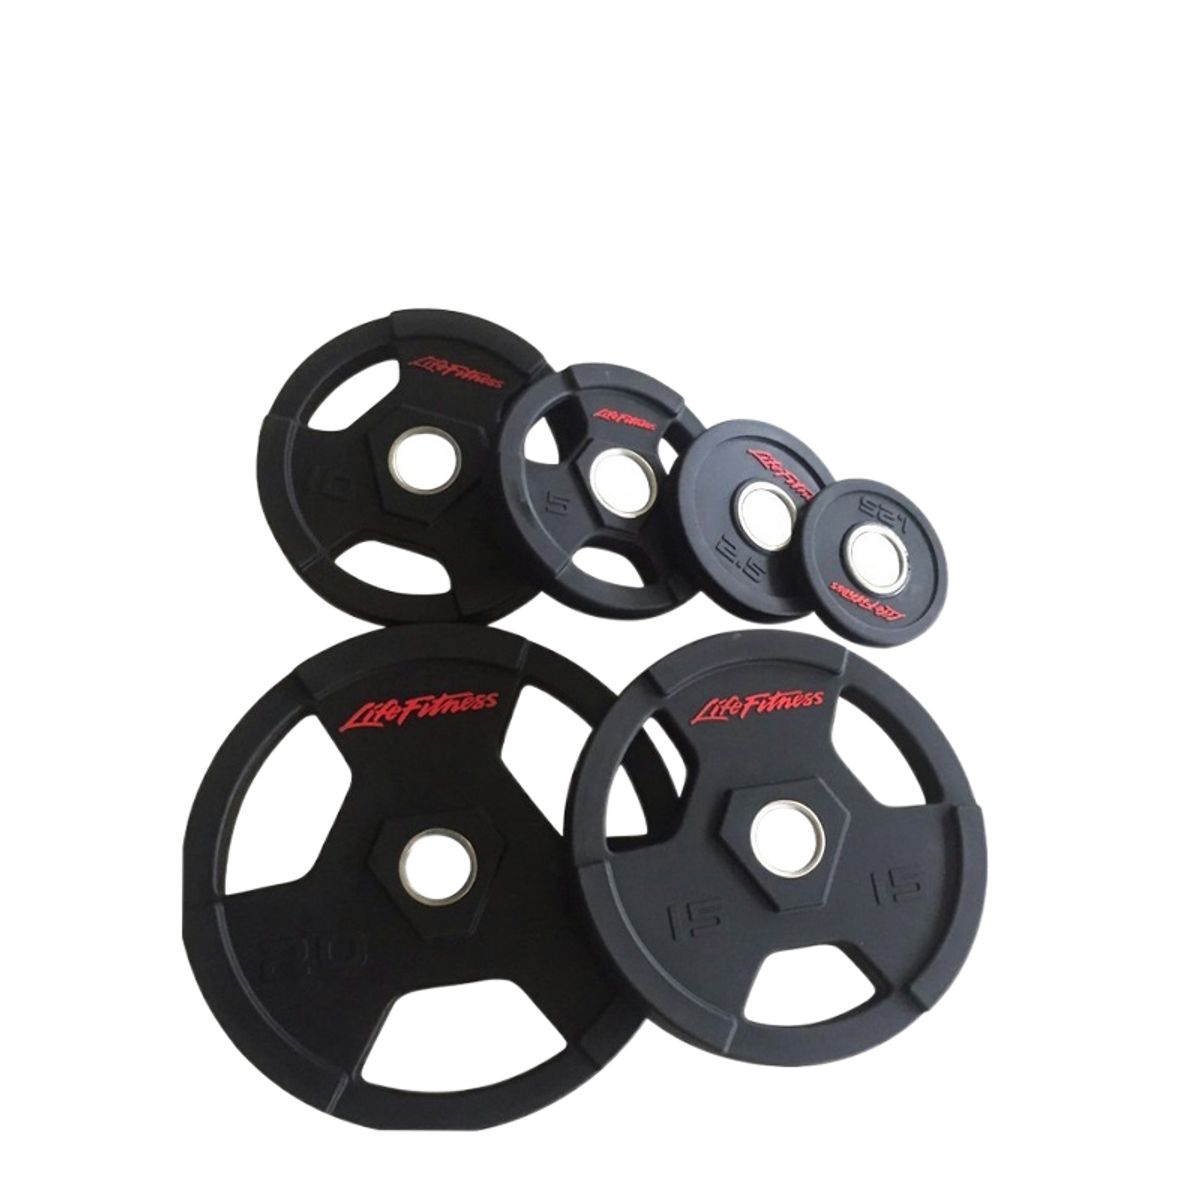 I-Wholesale weight plate barbell for gym fitness